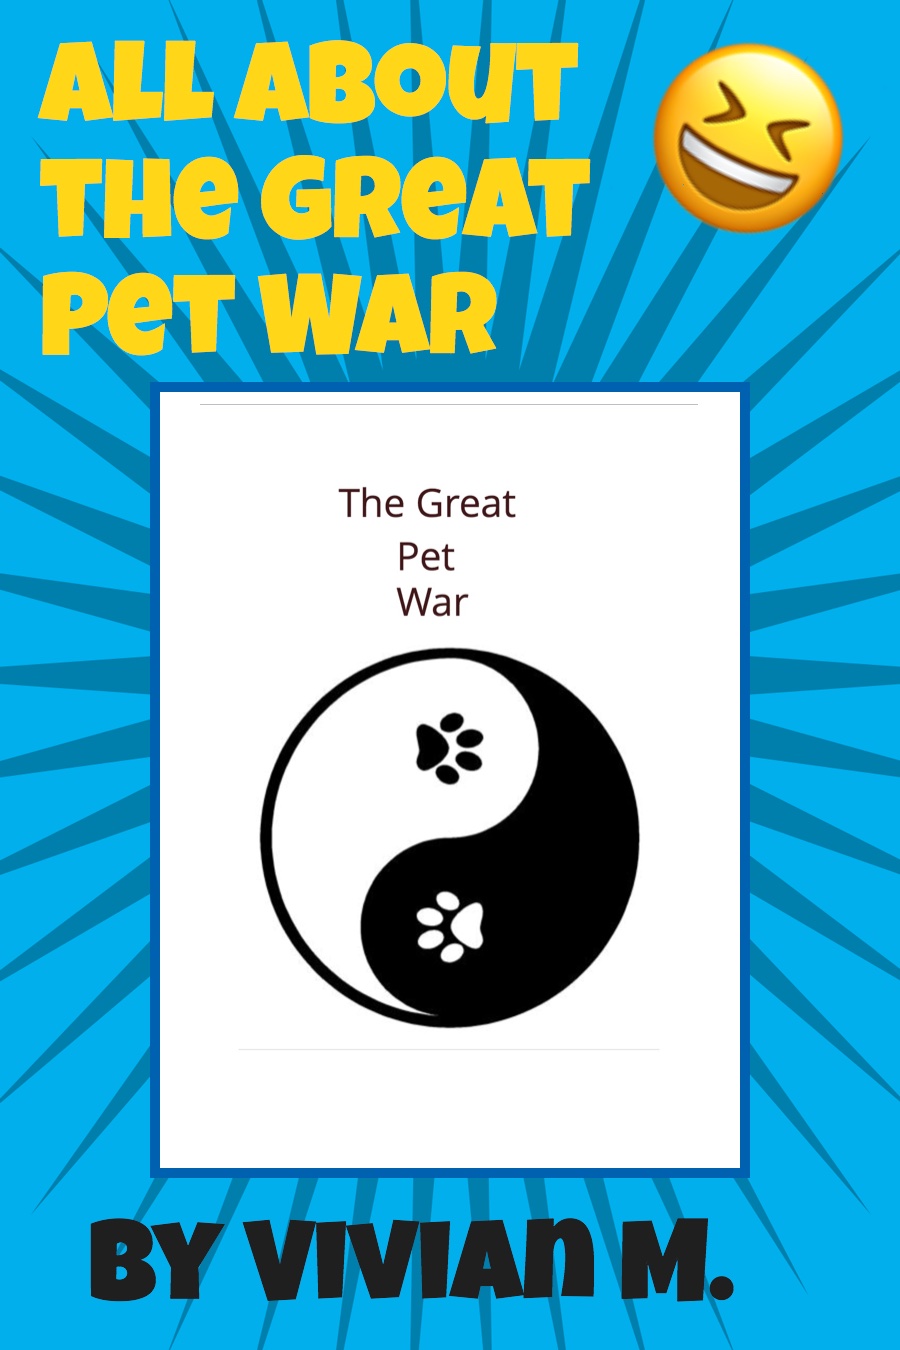 All About The Great Pet War by Vivian M